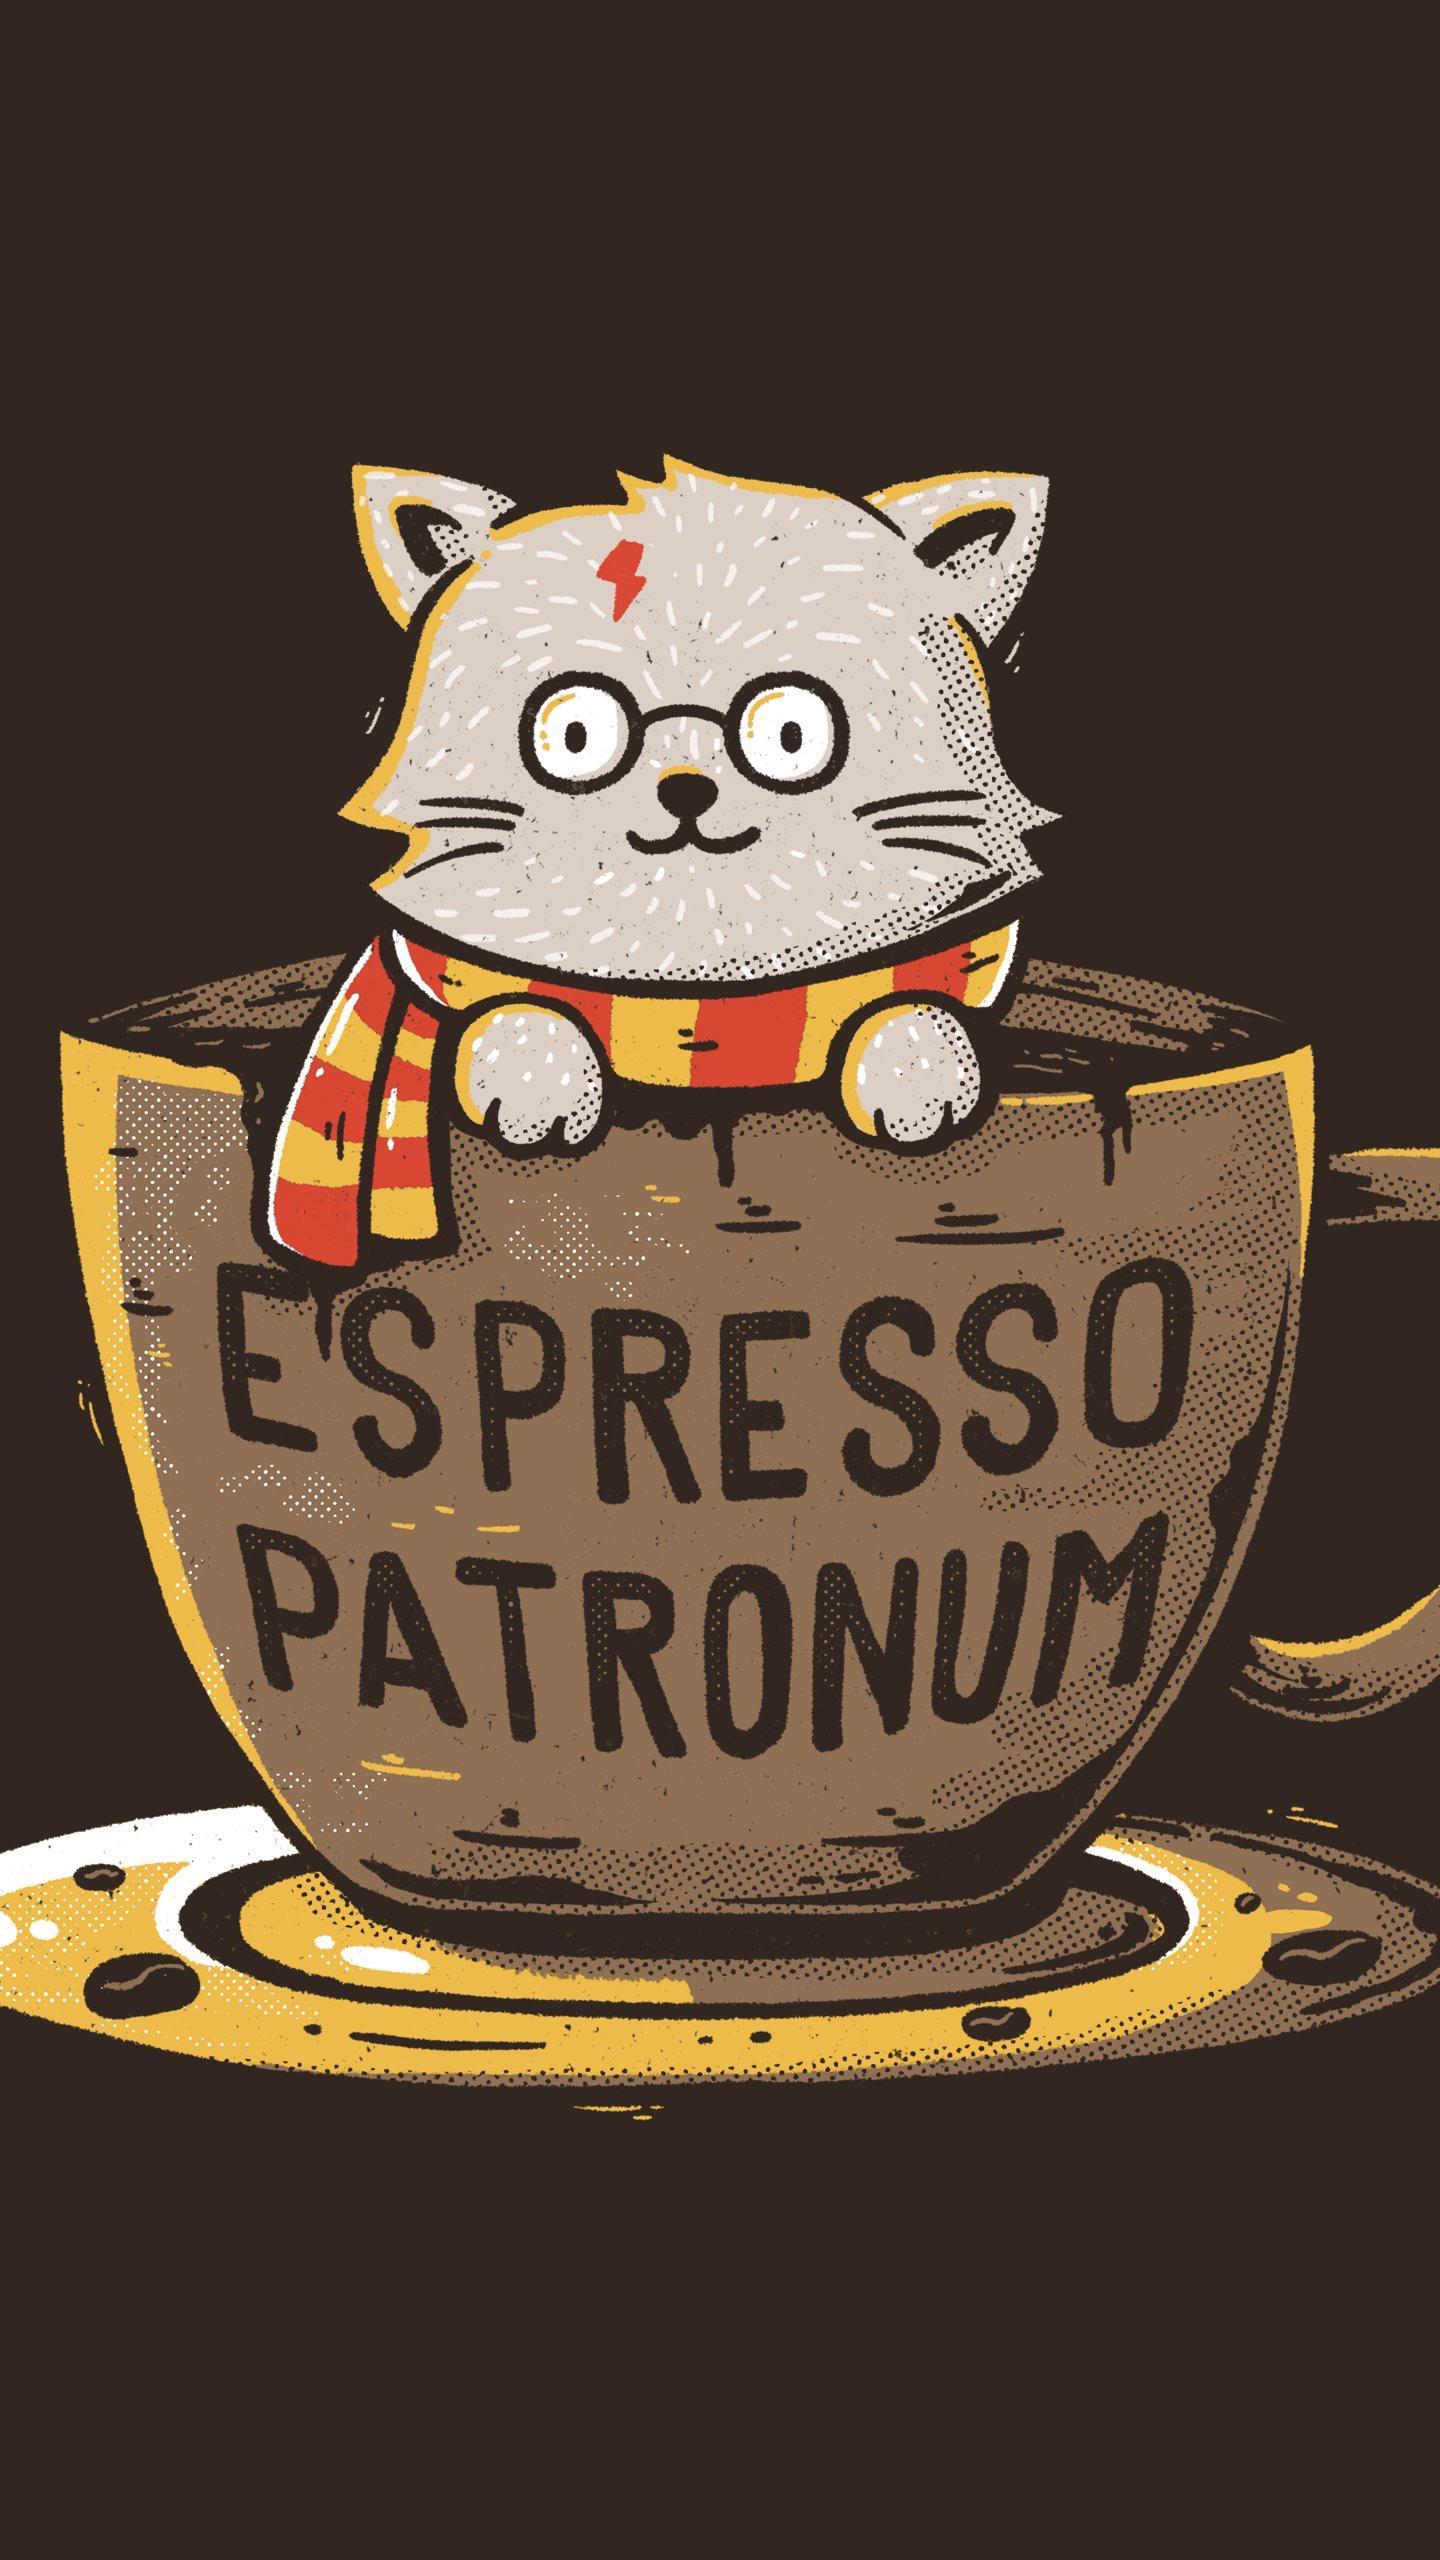 Purry Potter with “Espresso Patronum” spell on cup Wallpaper !